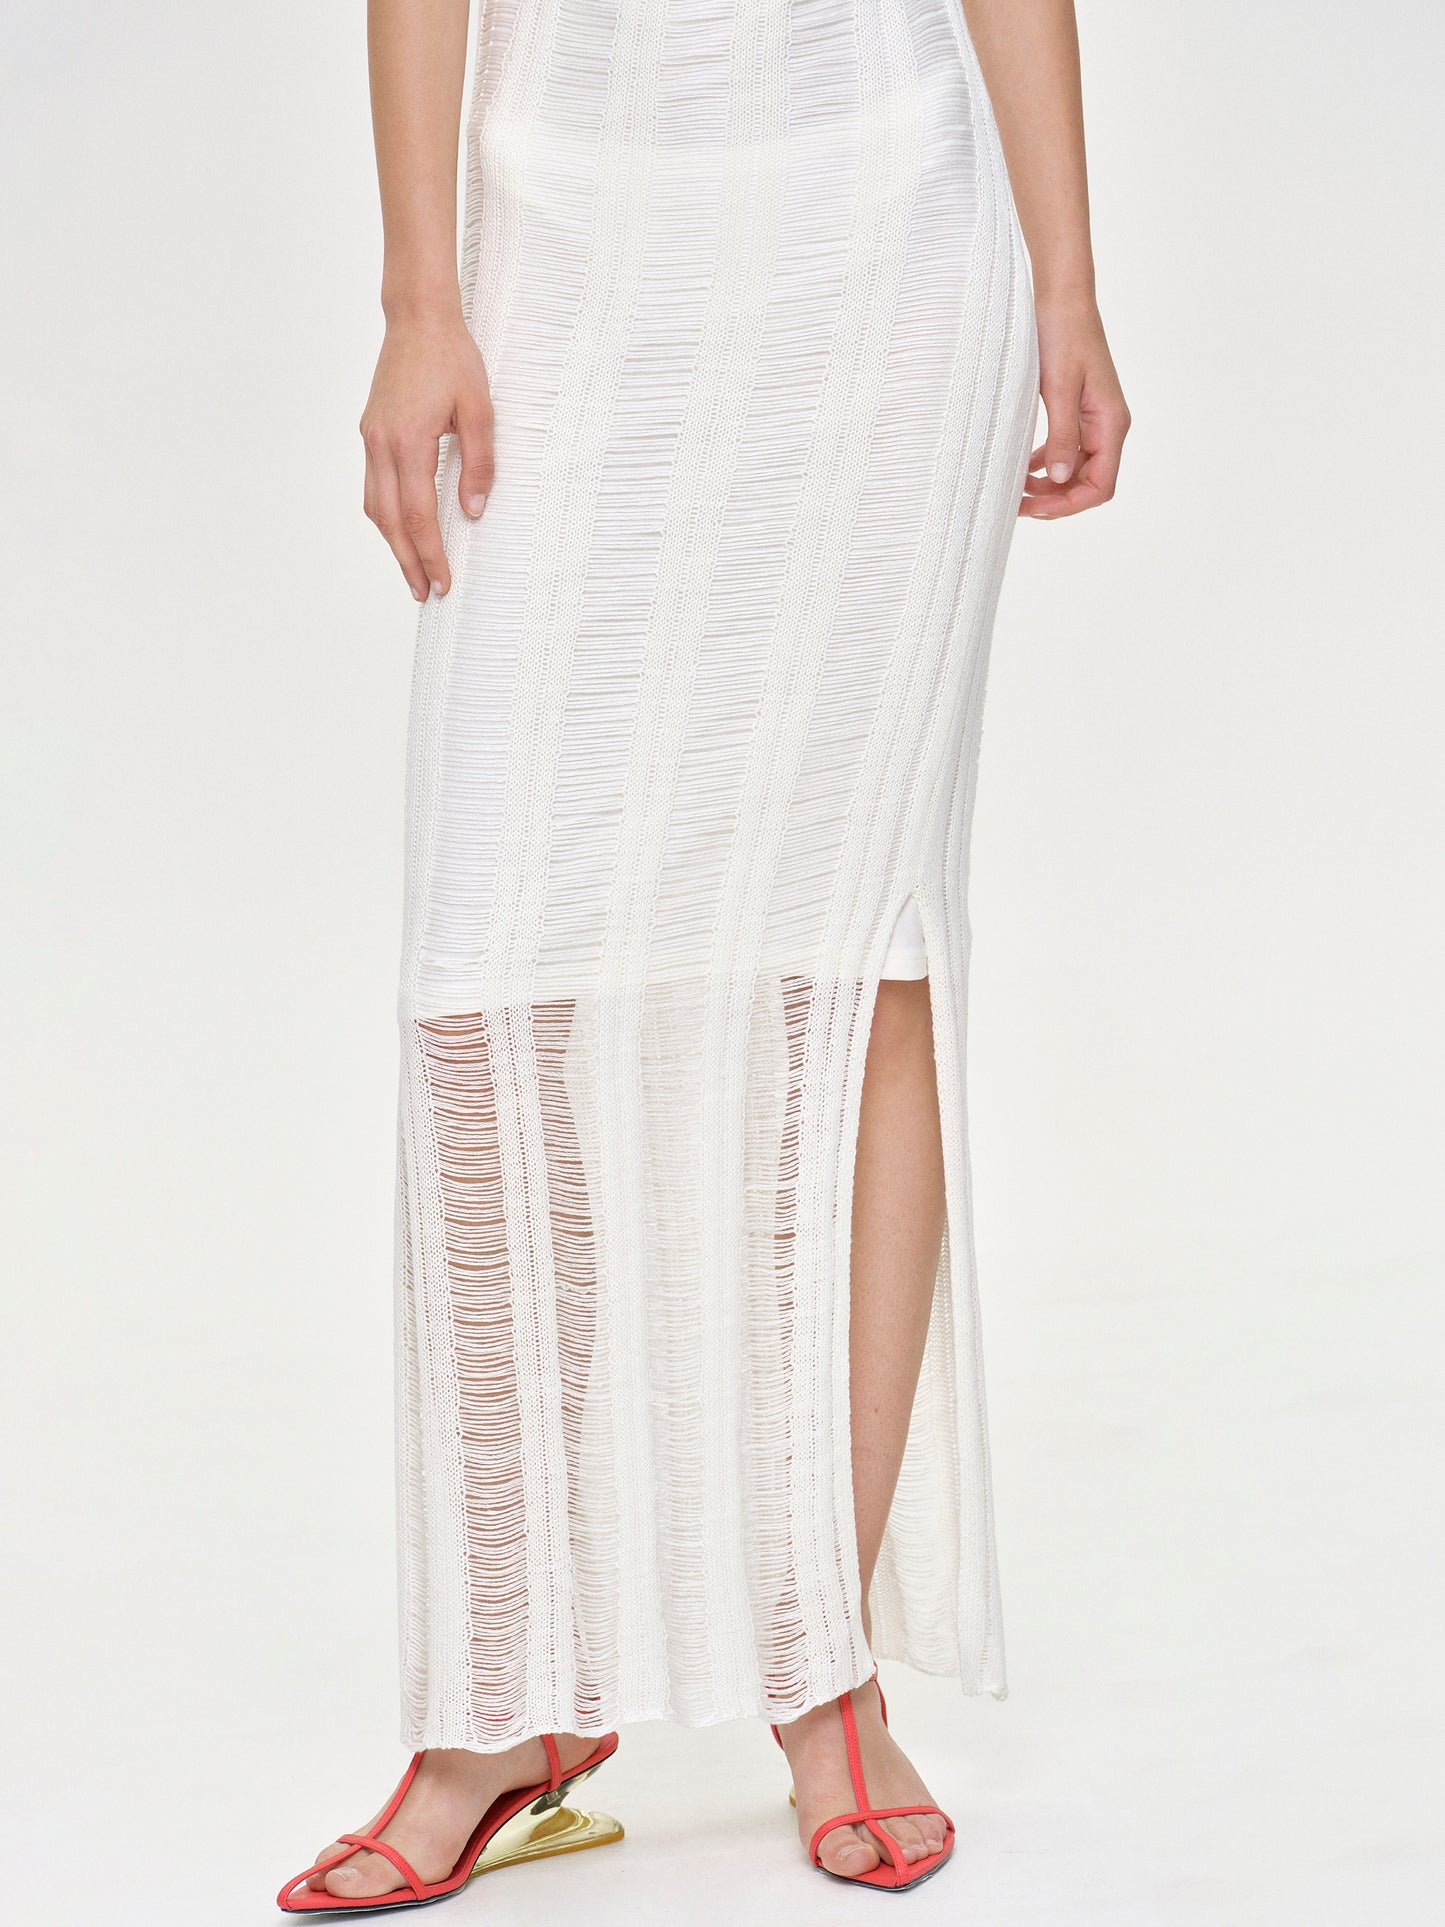 Pad Shoulder Netted Dress, White